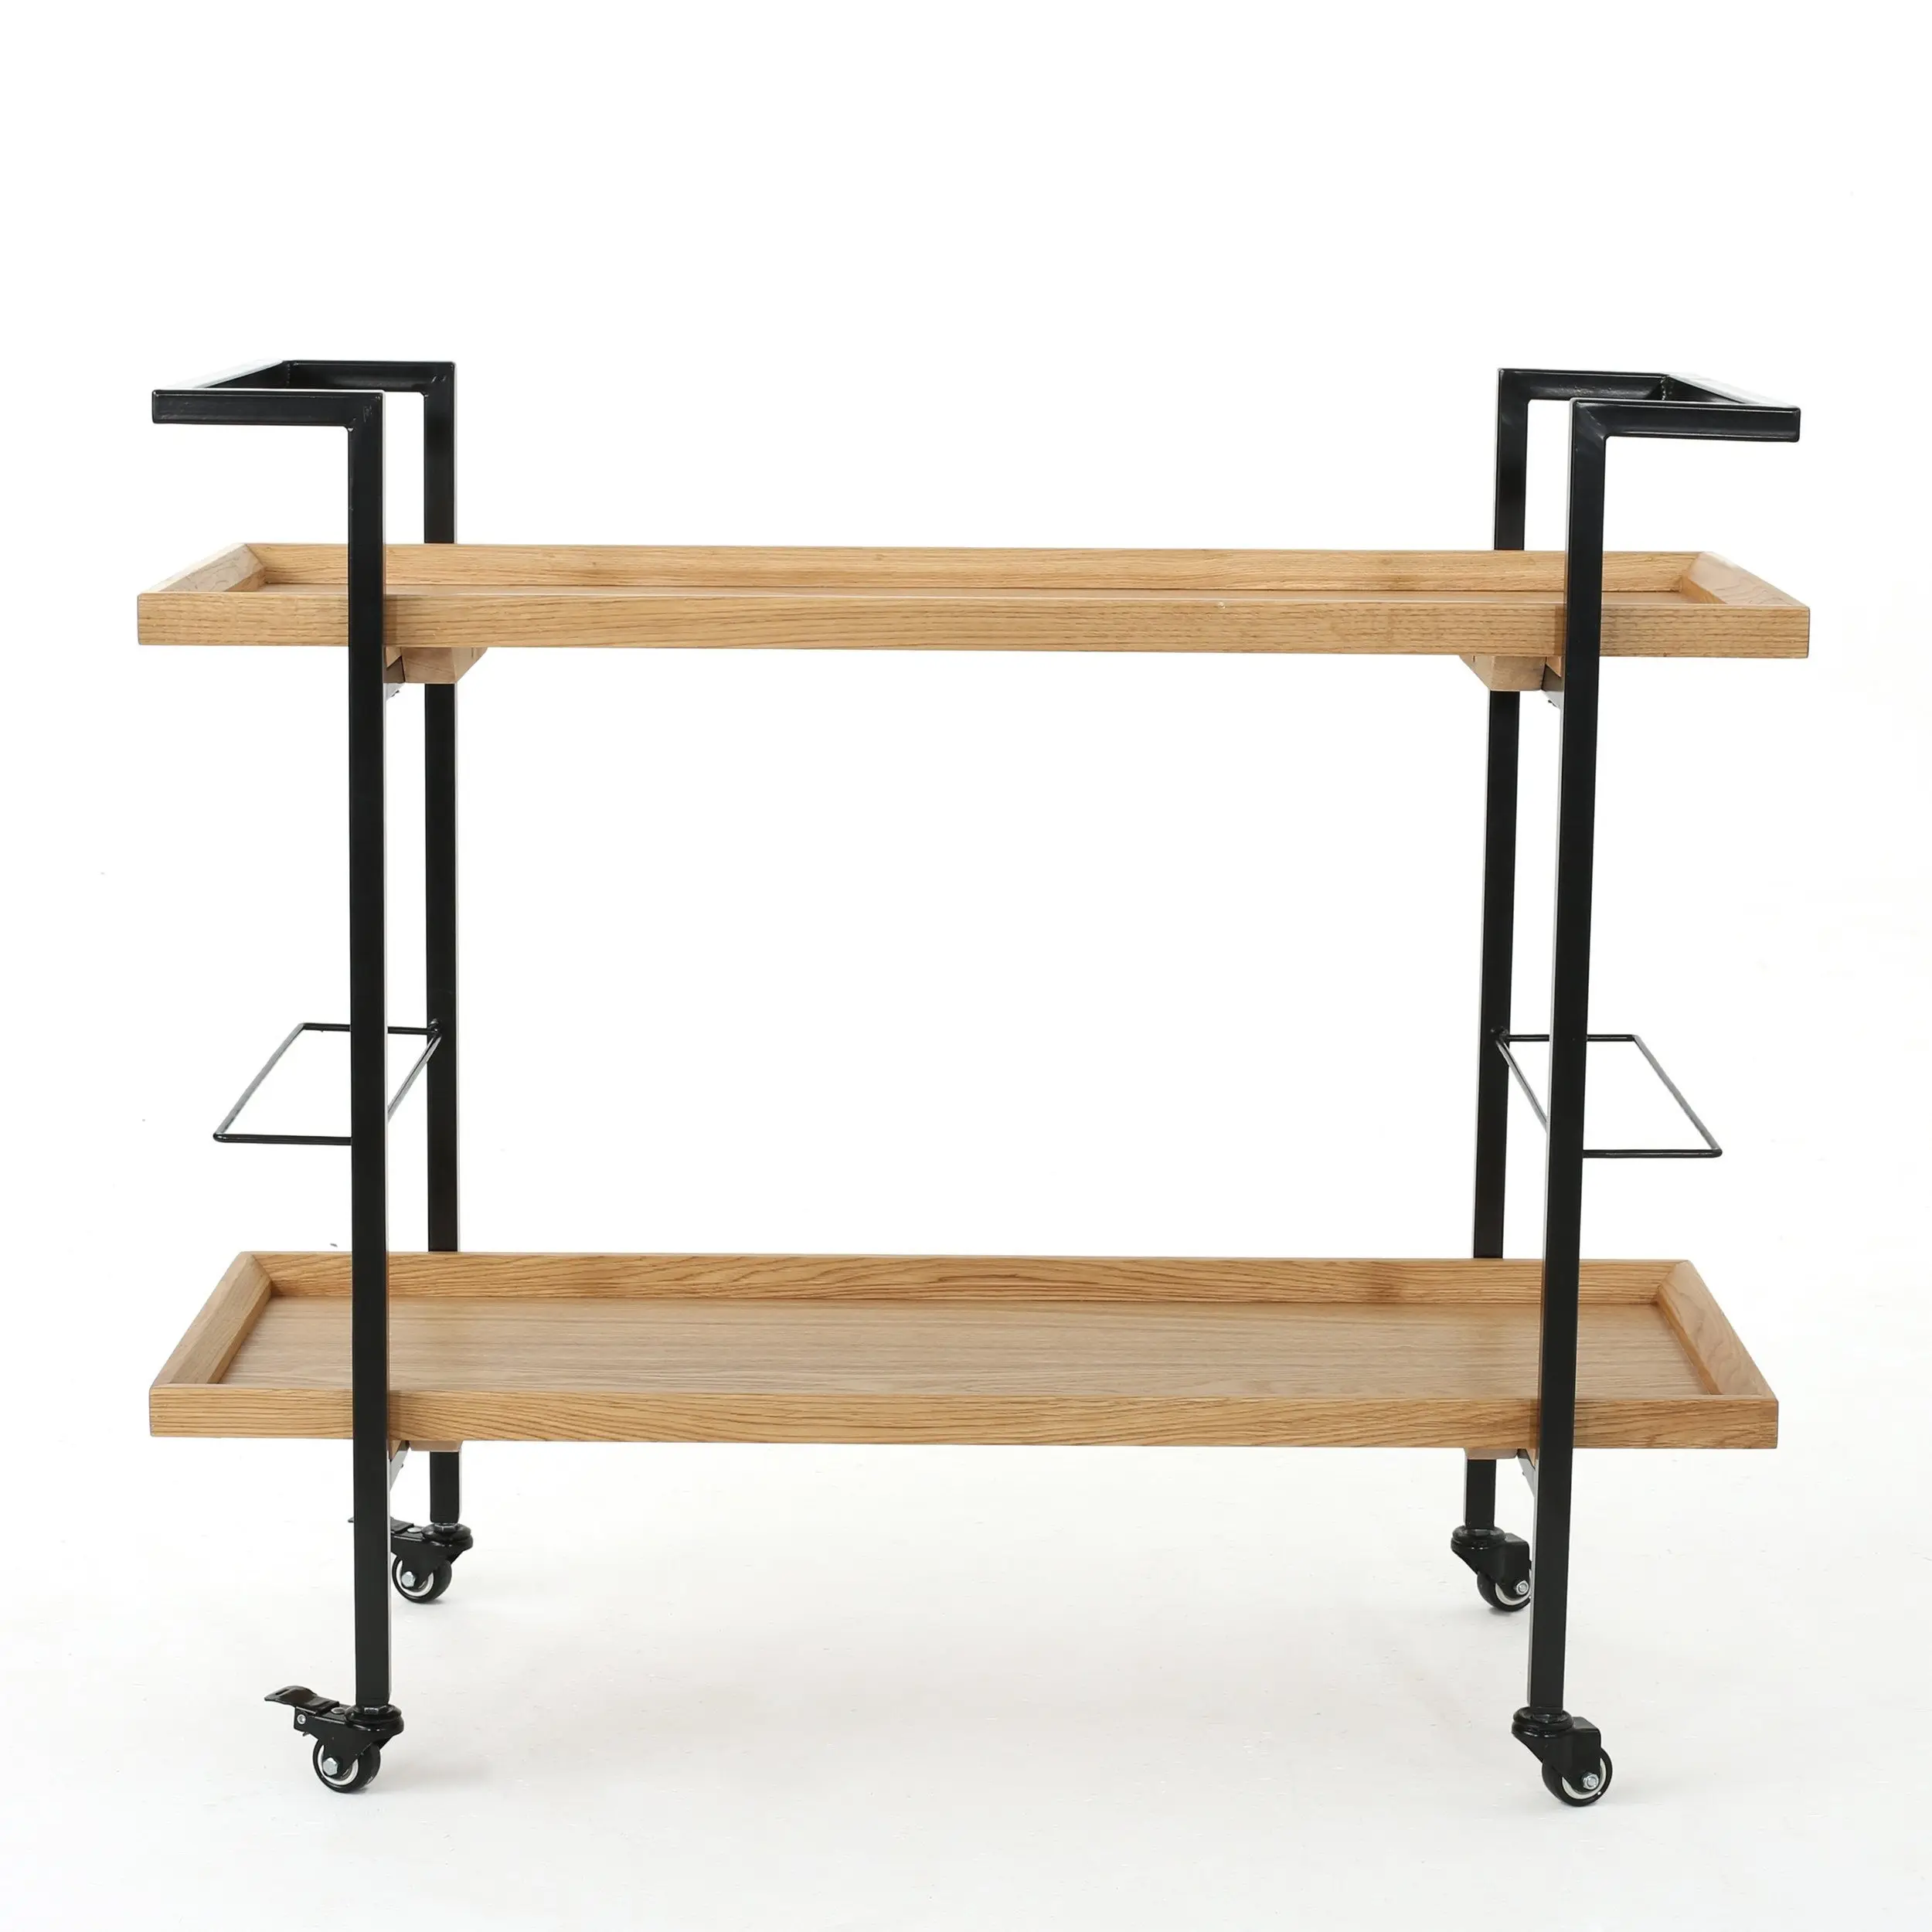 2 Tier Serving Wood Bar Cart Modern Industrial Rolling Casters With Lock For Homes Bars Restaurants Easy Handling and Assembling